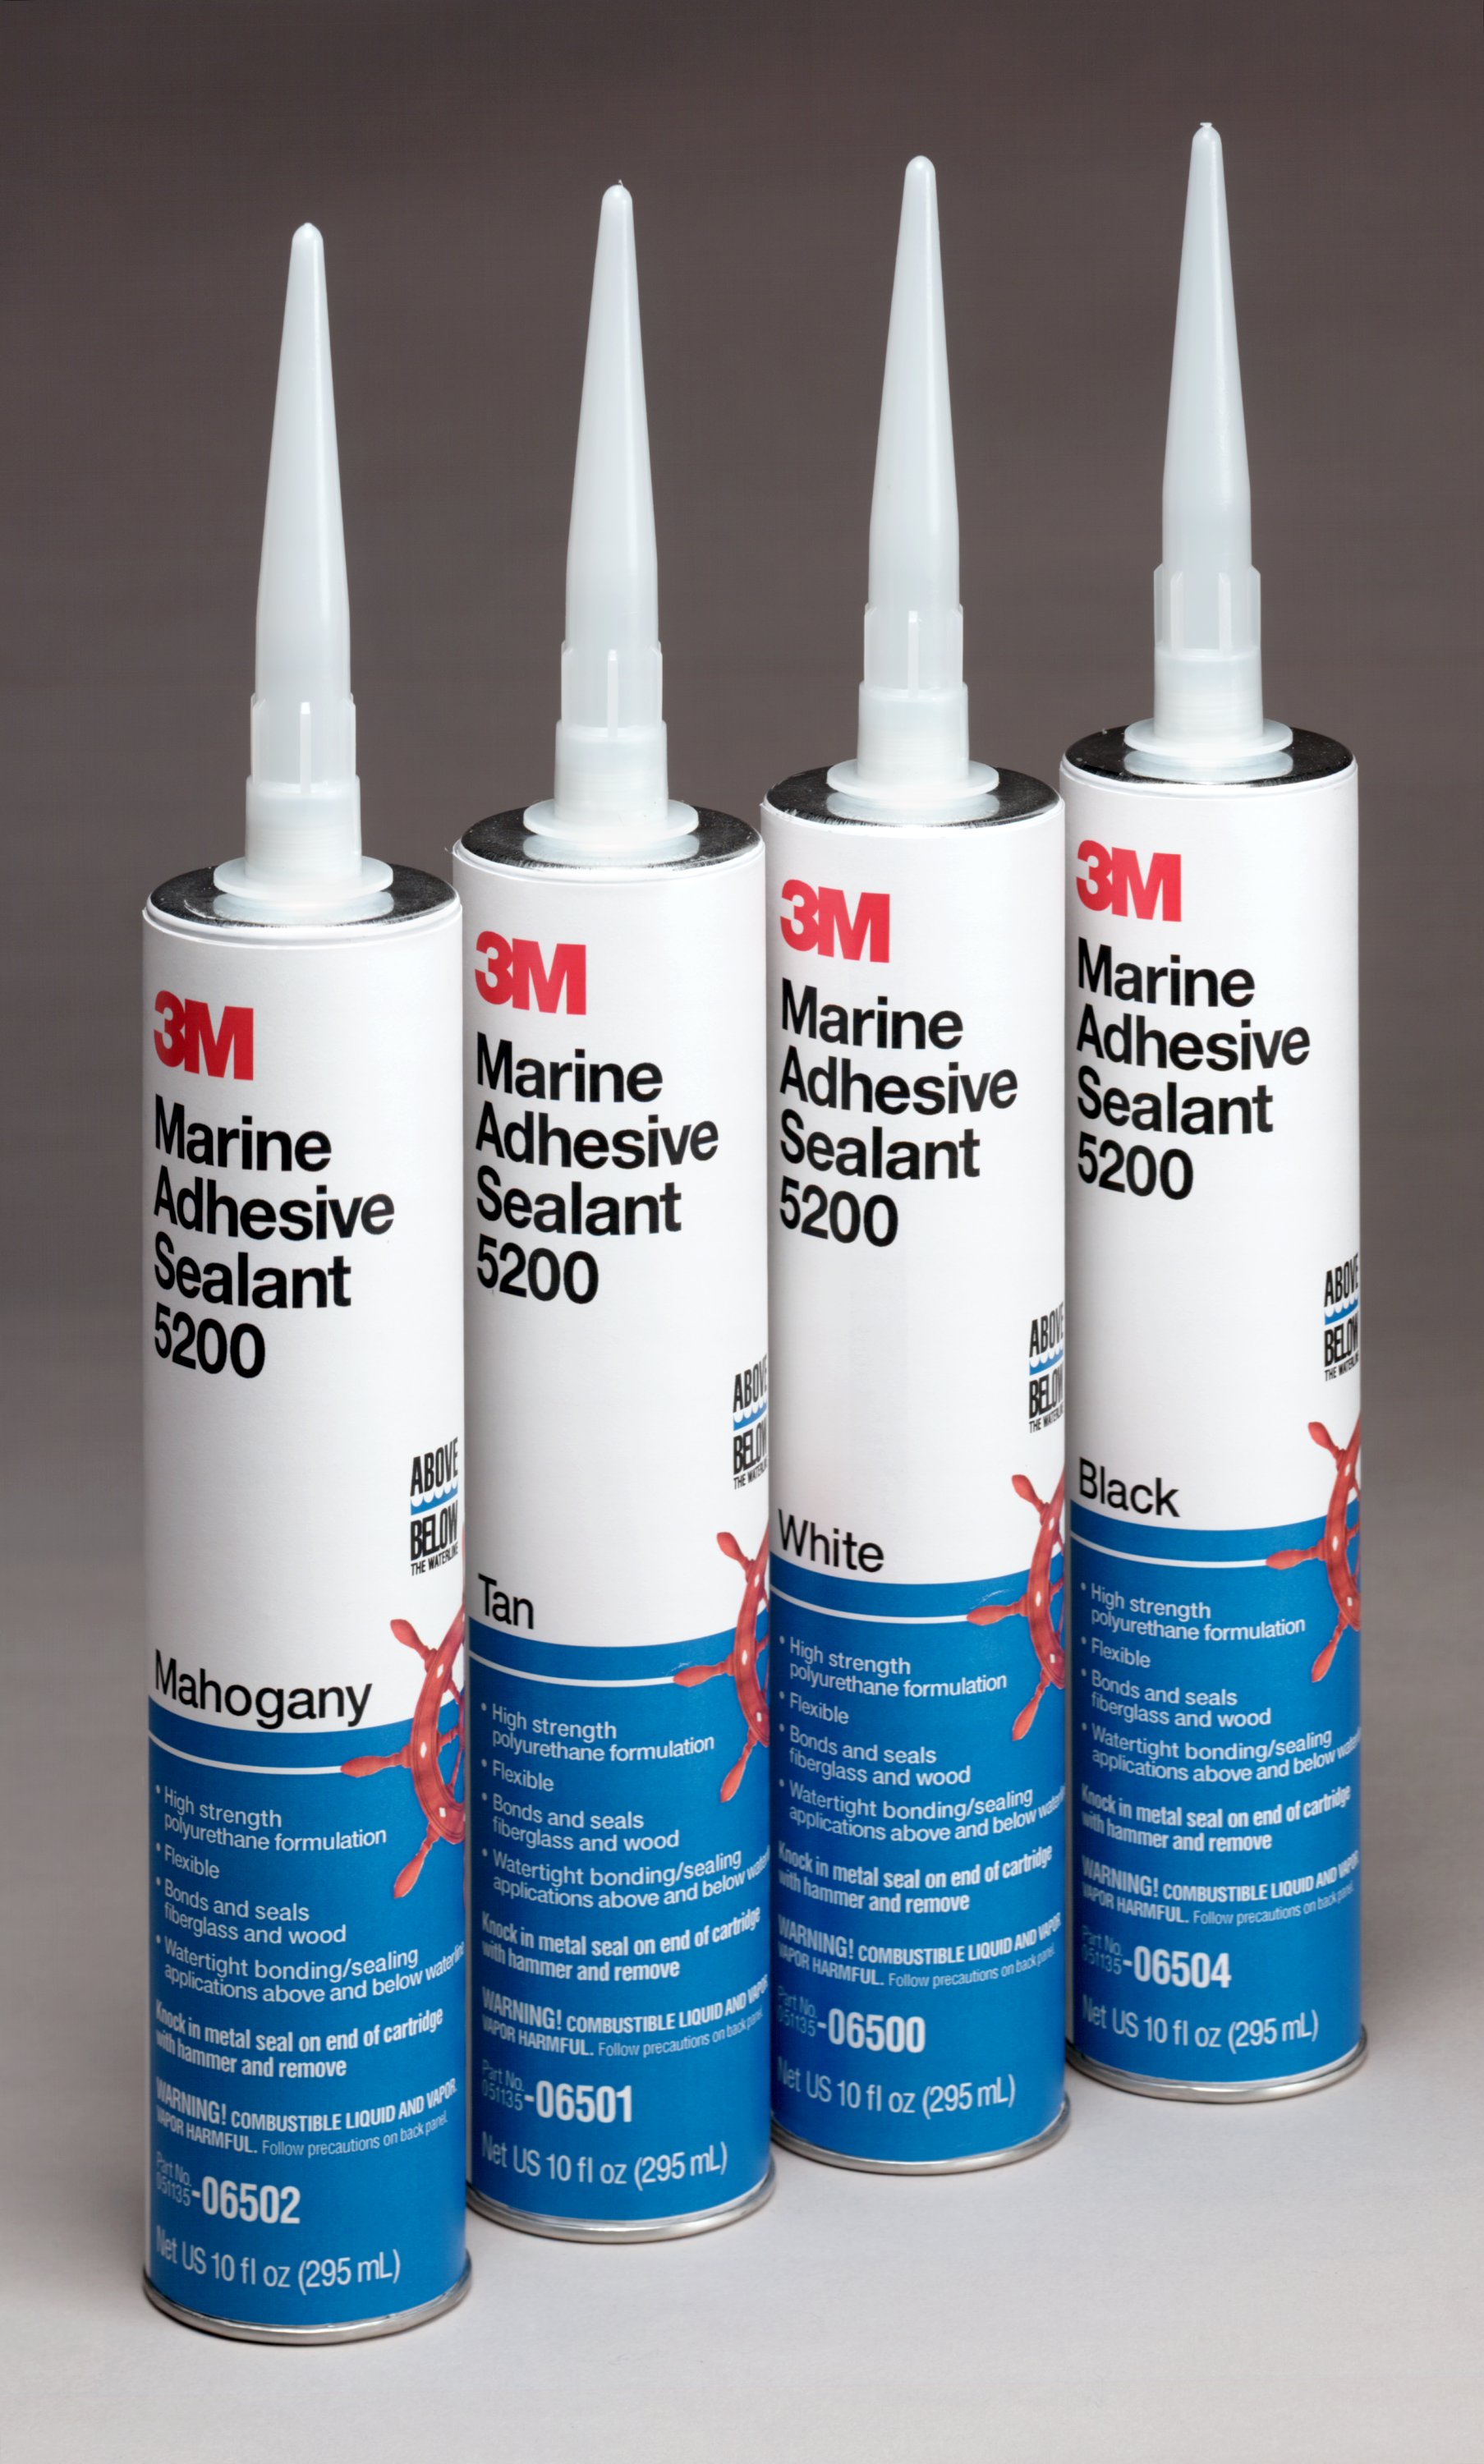 3M™ Marine Adhesive Sealant 5200 offers permanent adhesion to wood, gelcoat and fiberglass.